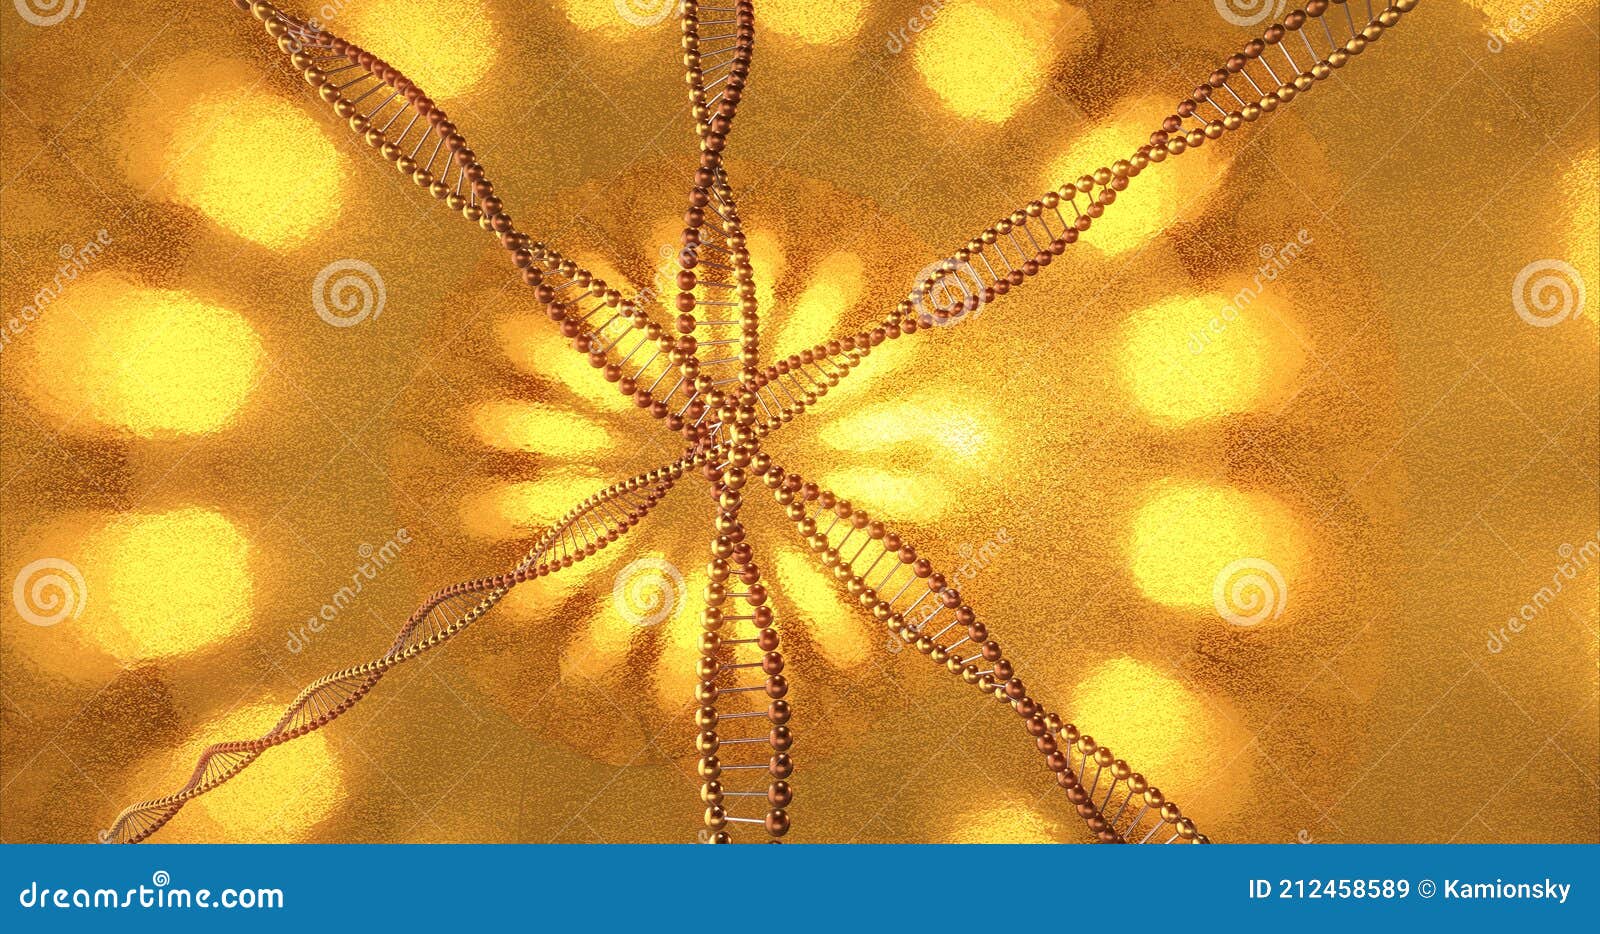 Golden Geometric Background with Swirls of DNA Molecules. 3D Rendering  Stock Illustration - Illustration of covid, chemistry: 212458589